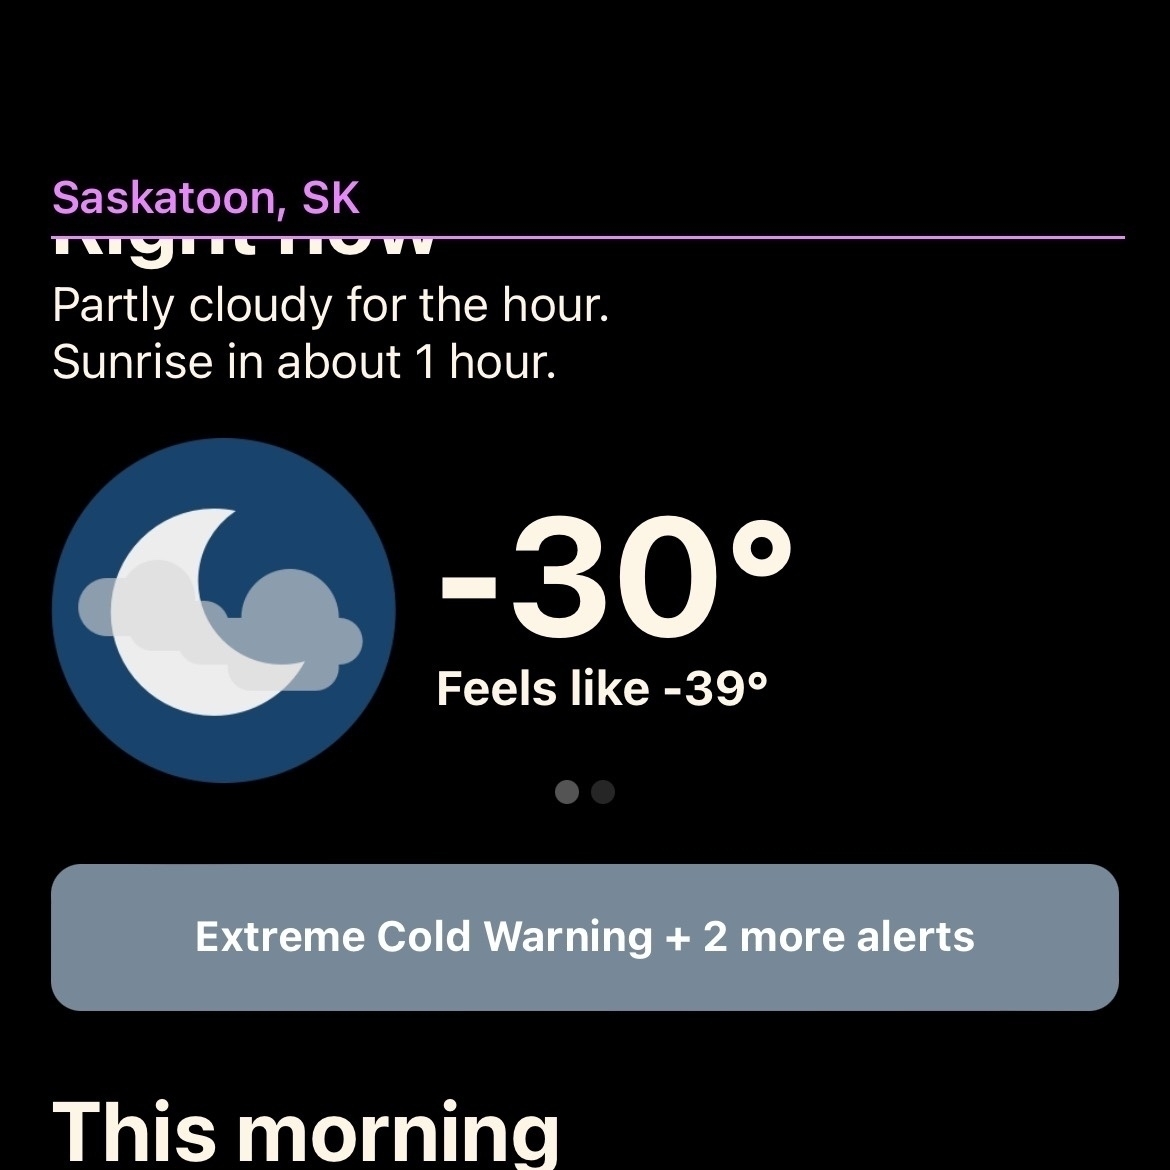 weather forecast app showing saskatoon will be 0 tonight but is -40C now. 